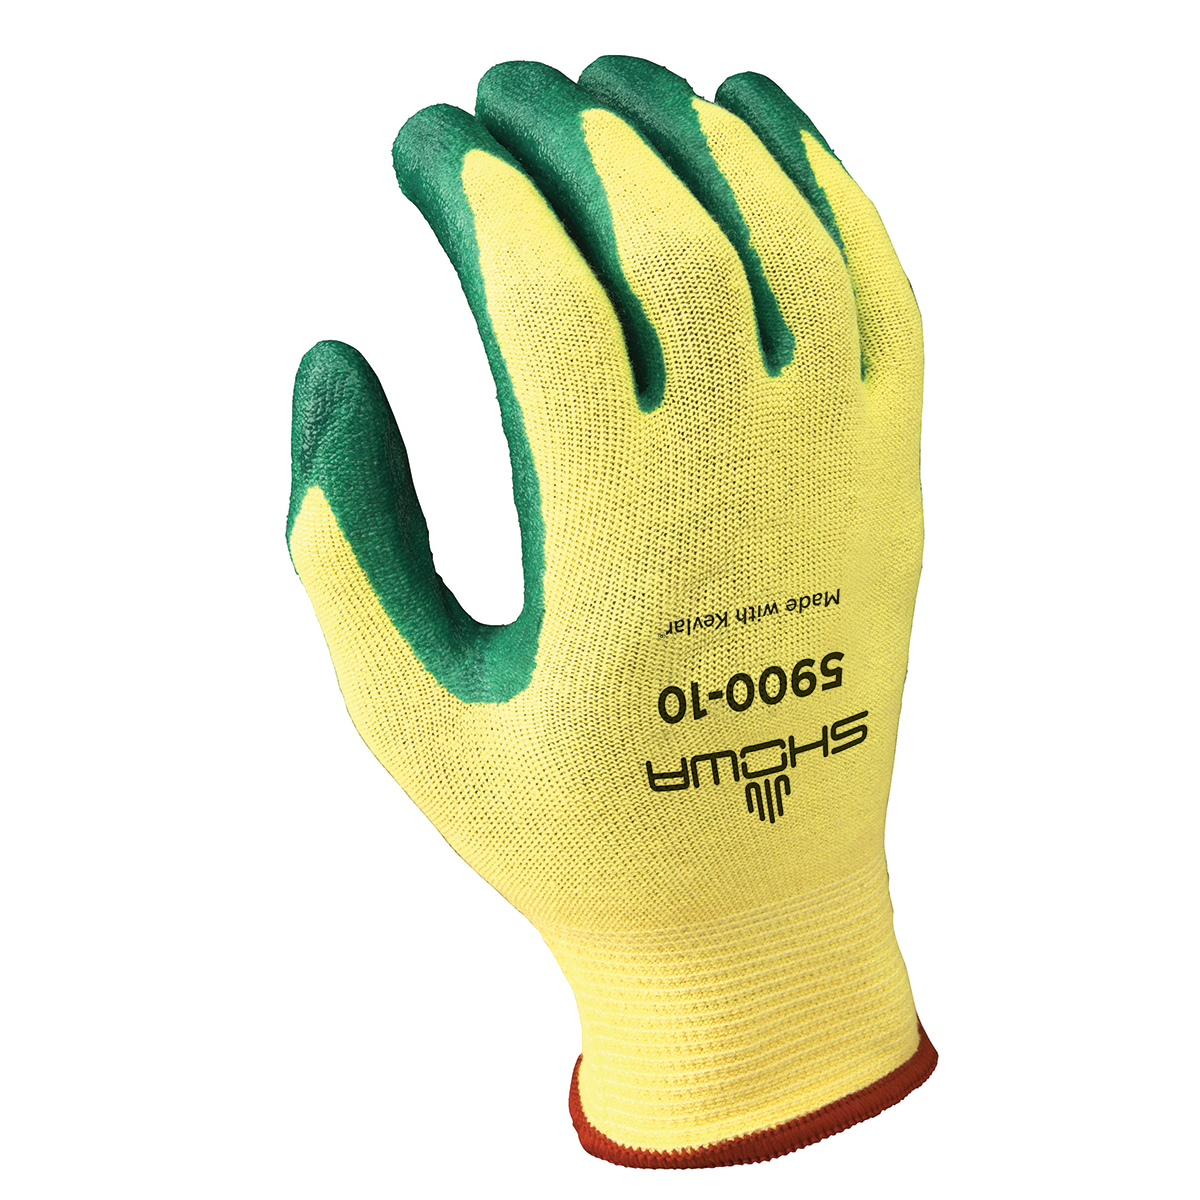 Cut resistant, nitrile-coated flat-dipped, yellow/green dip, seamless, cut-resistant, Kevlar®-Lycra® shell, large ANSI CUT LEVEL A3 - Cut Resistant